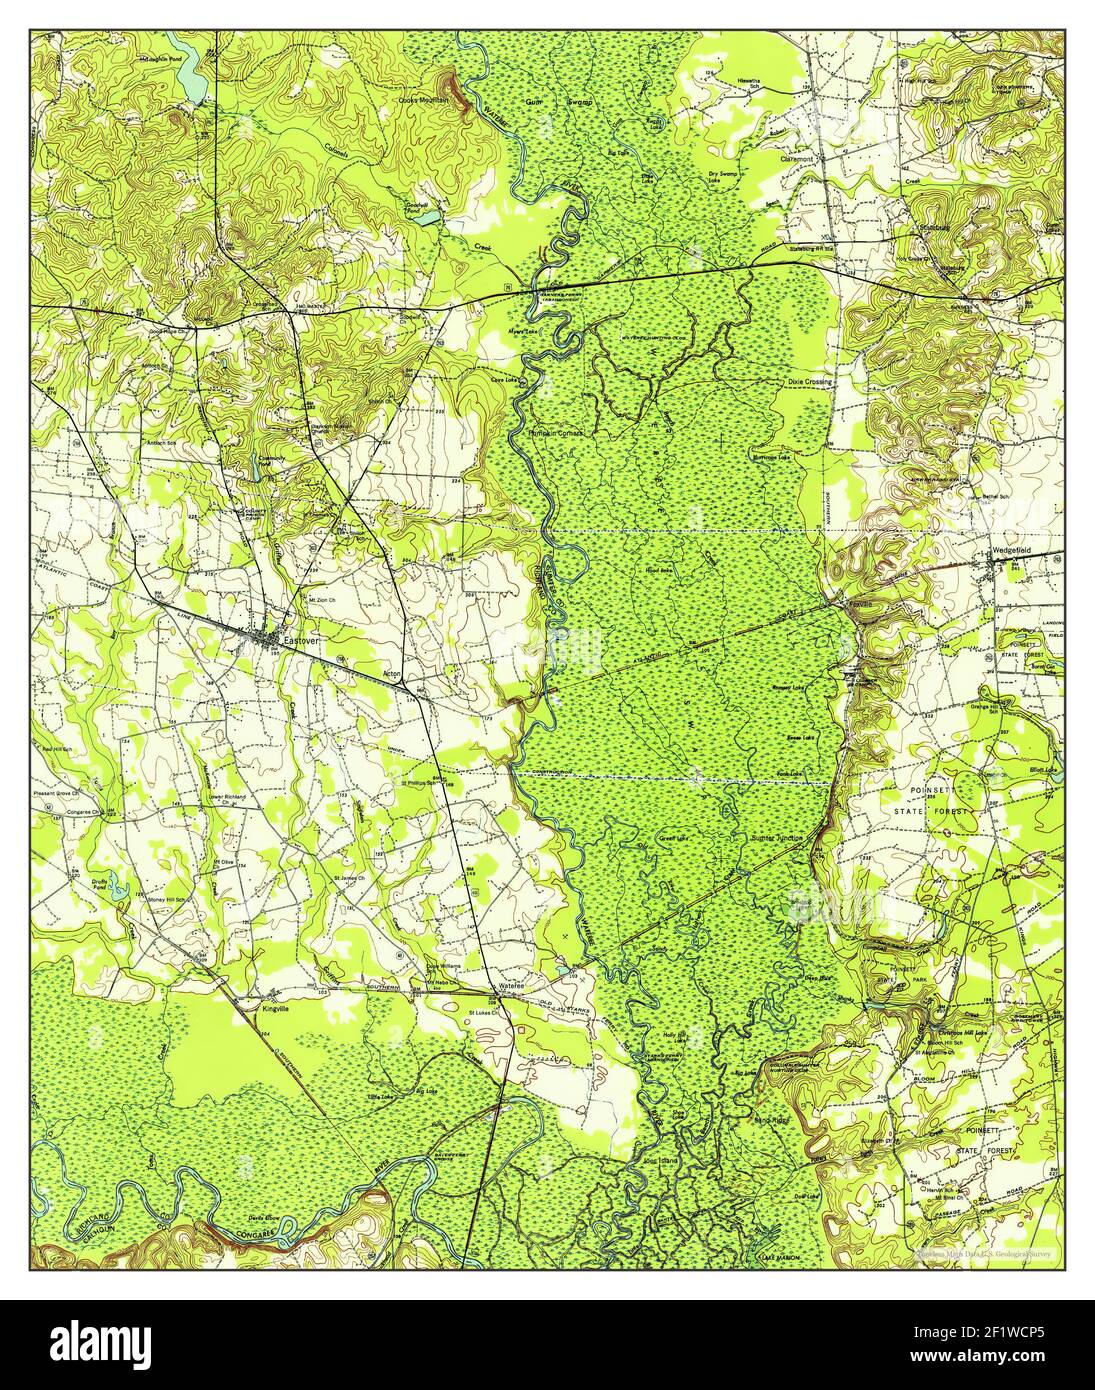 Eastover, South Carolina, map 1943, 1:62500, United States of America by Timeless Maps, data U.S. Geological Survey Stock Photo